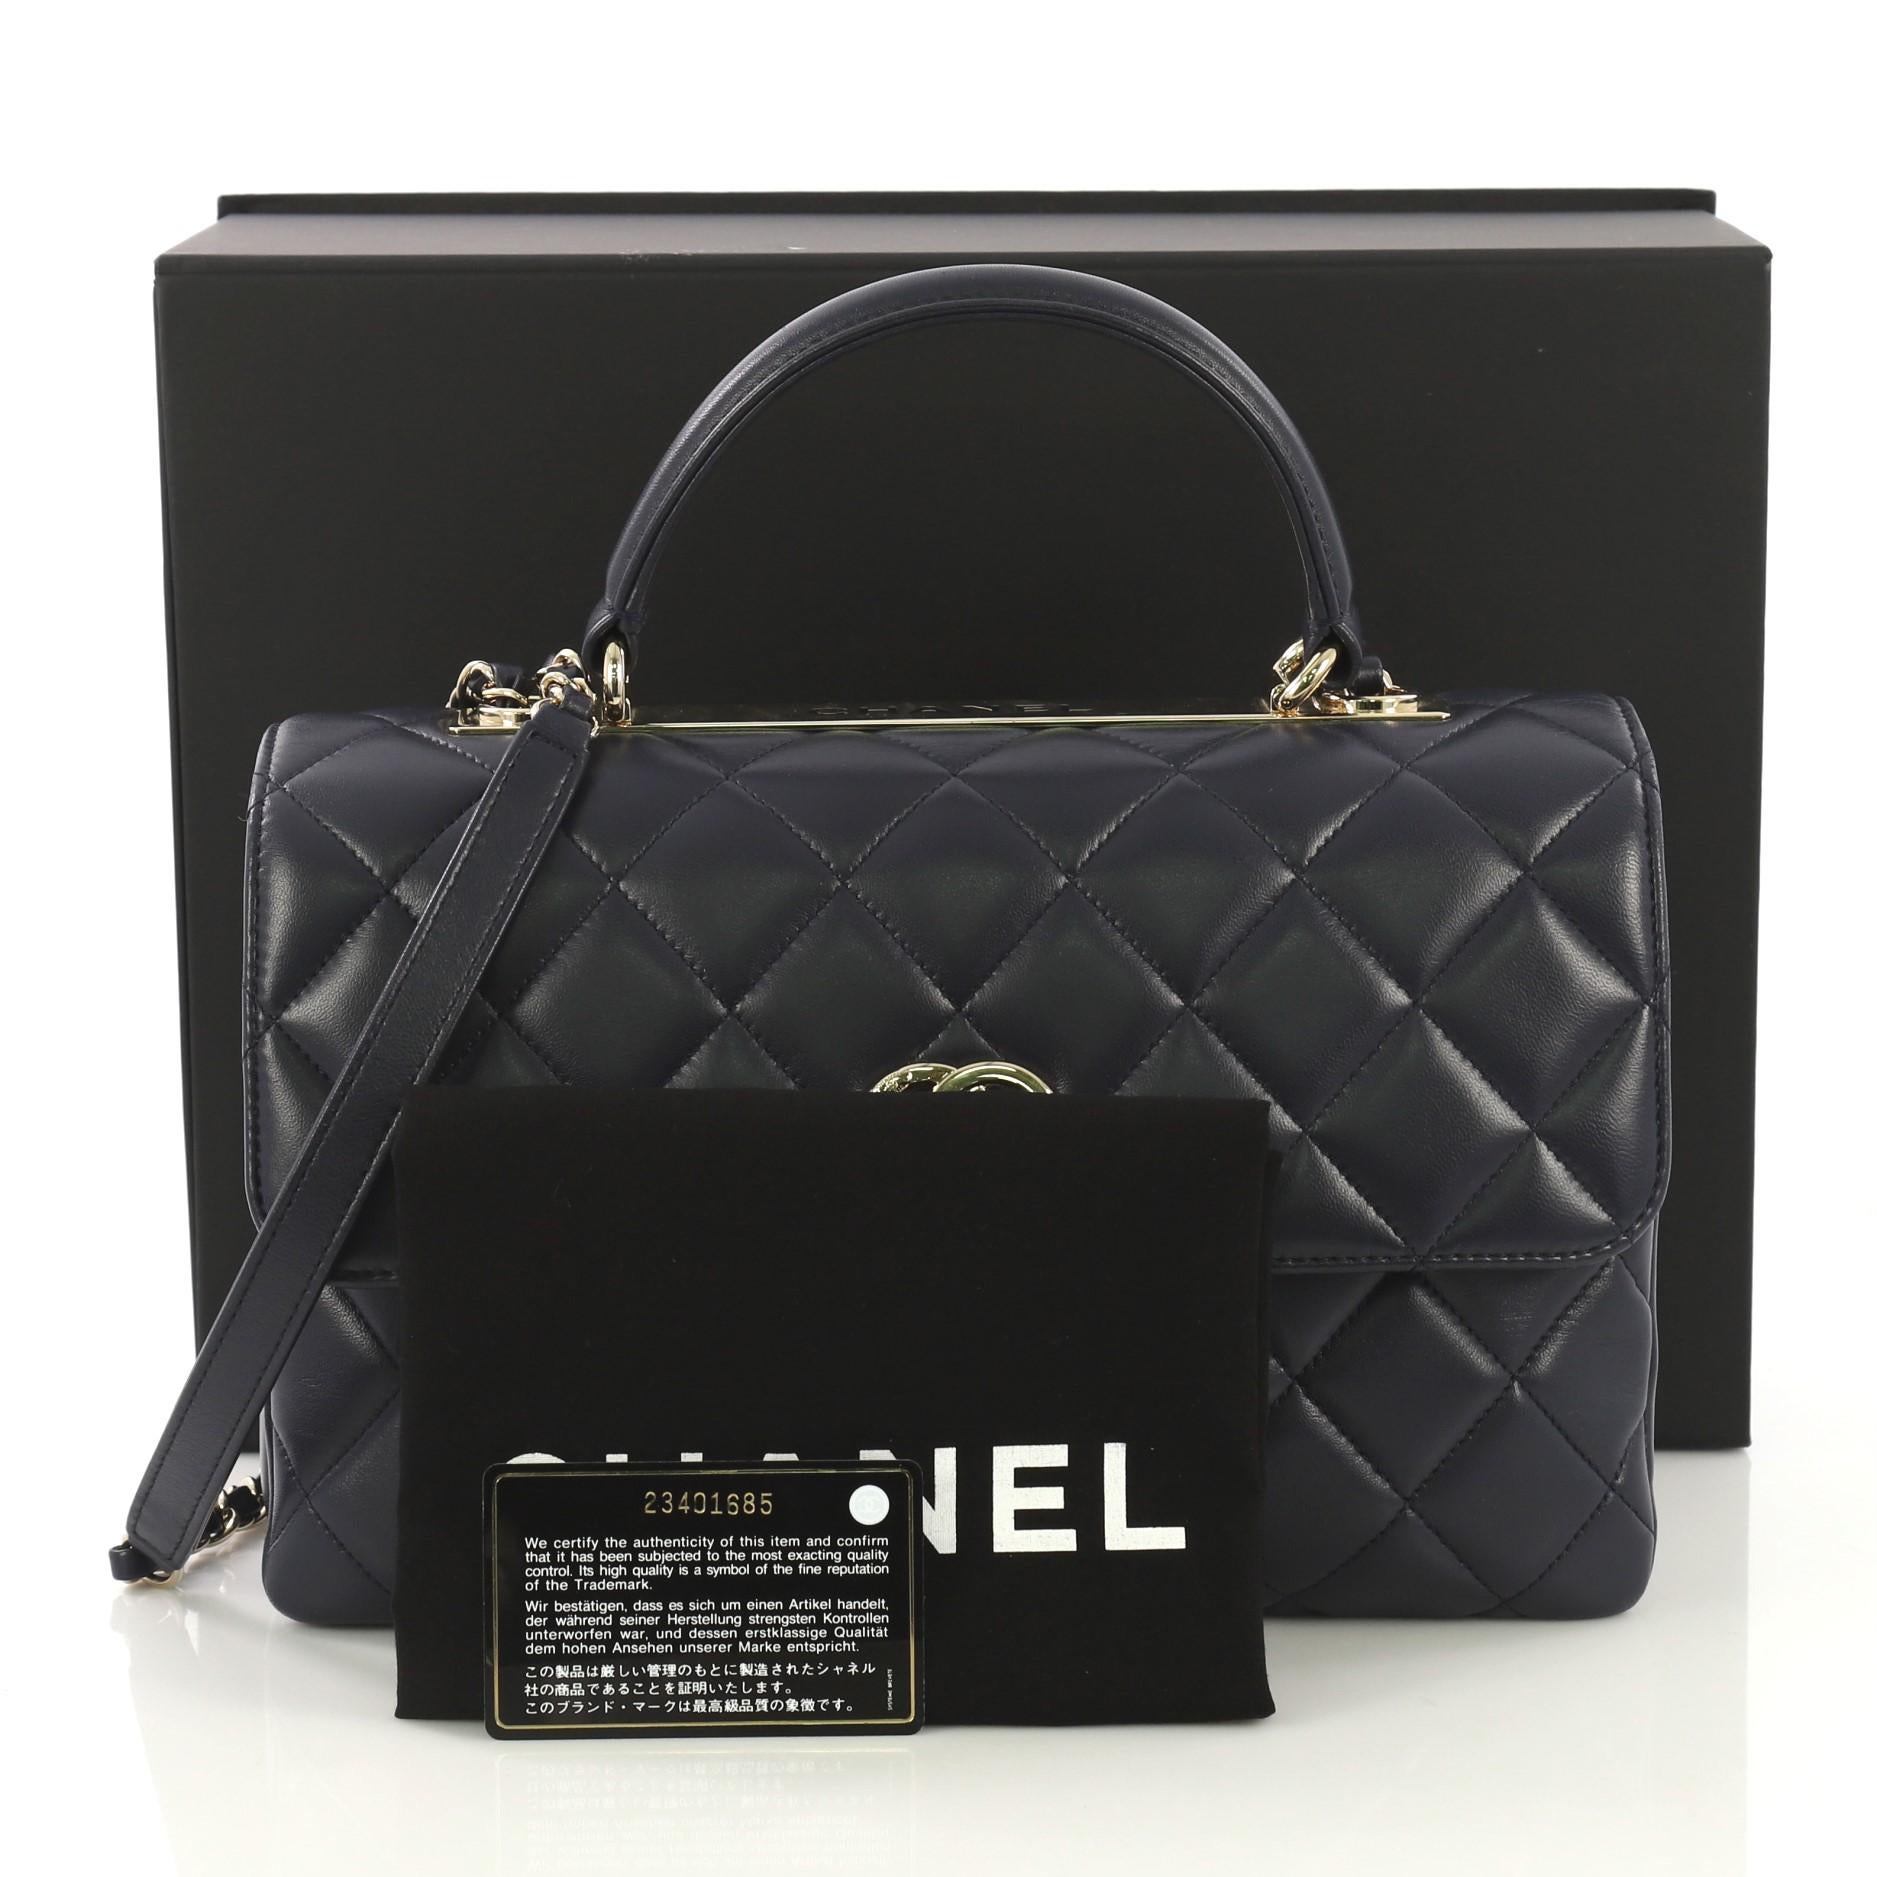 This Chanel Trendy CC Top Handle Bag Quilted Lambskin Medium, crafted from dark blue quilted lambskin, features a leather top handle, woven-in leather chain strap with leather pad, and gold-tone hardware. Its turn-lock closure opens to a burgundy